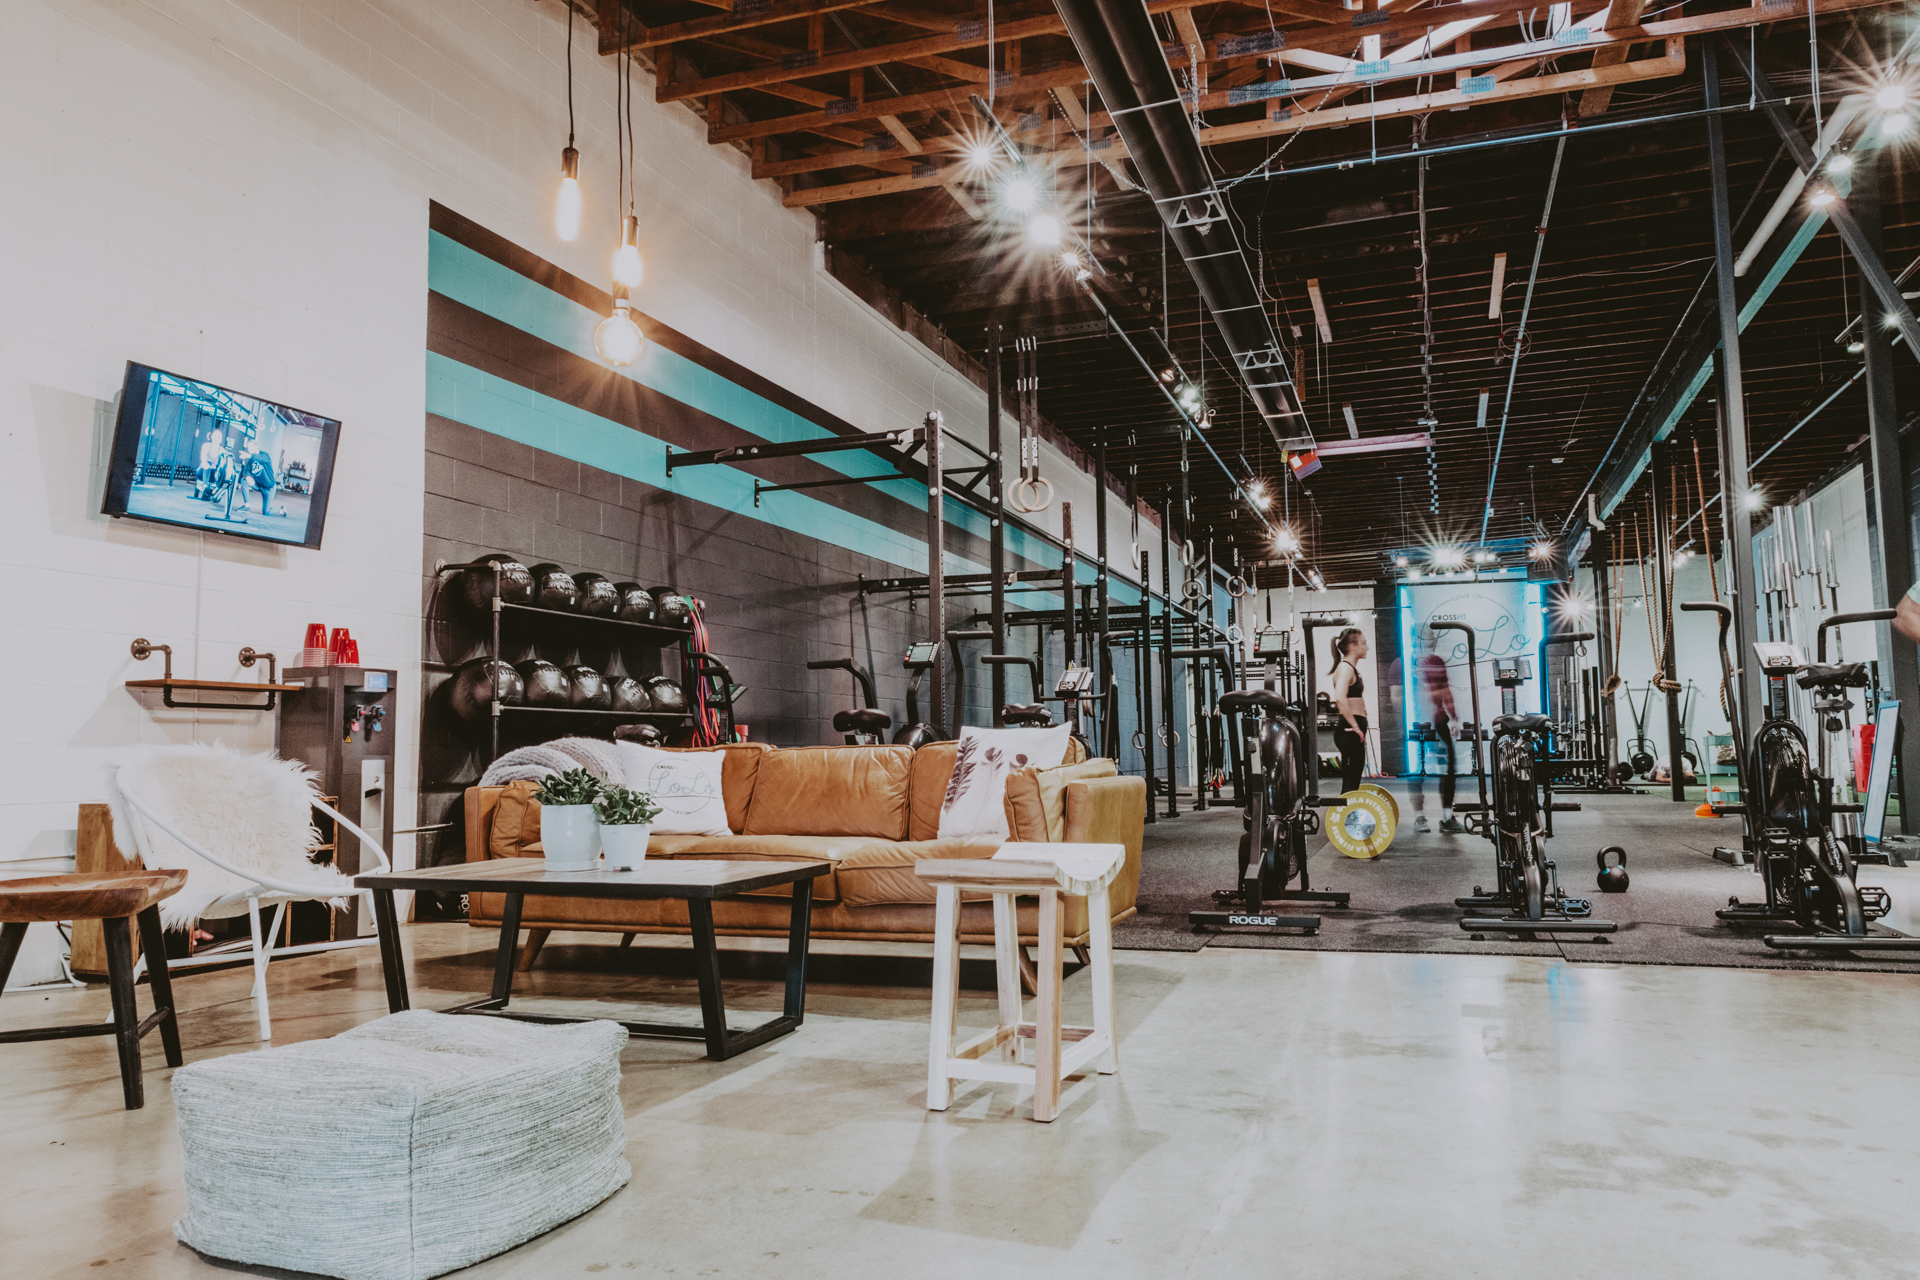 CrossFit Gym in Victoria BC that is brand new and looks hipster AF